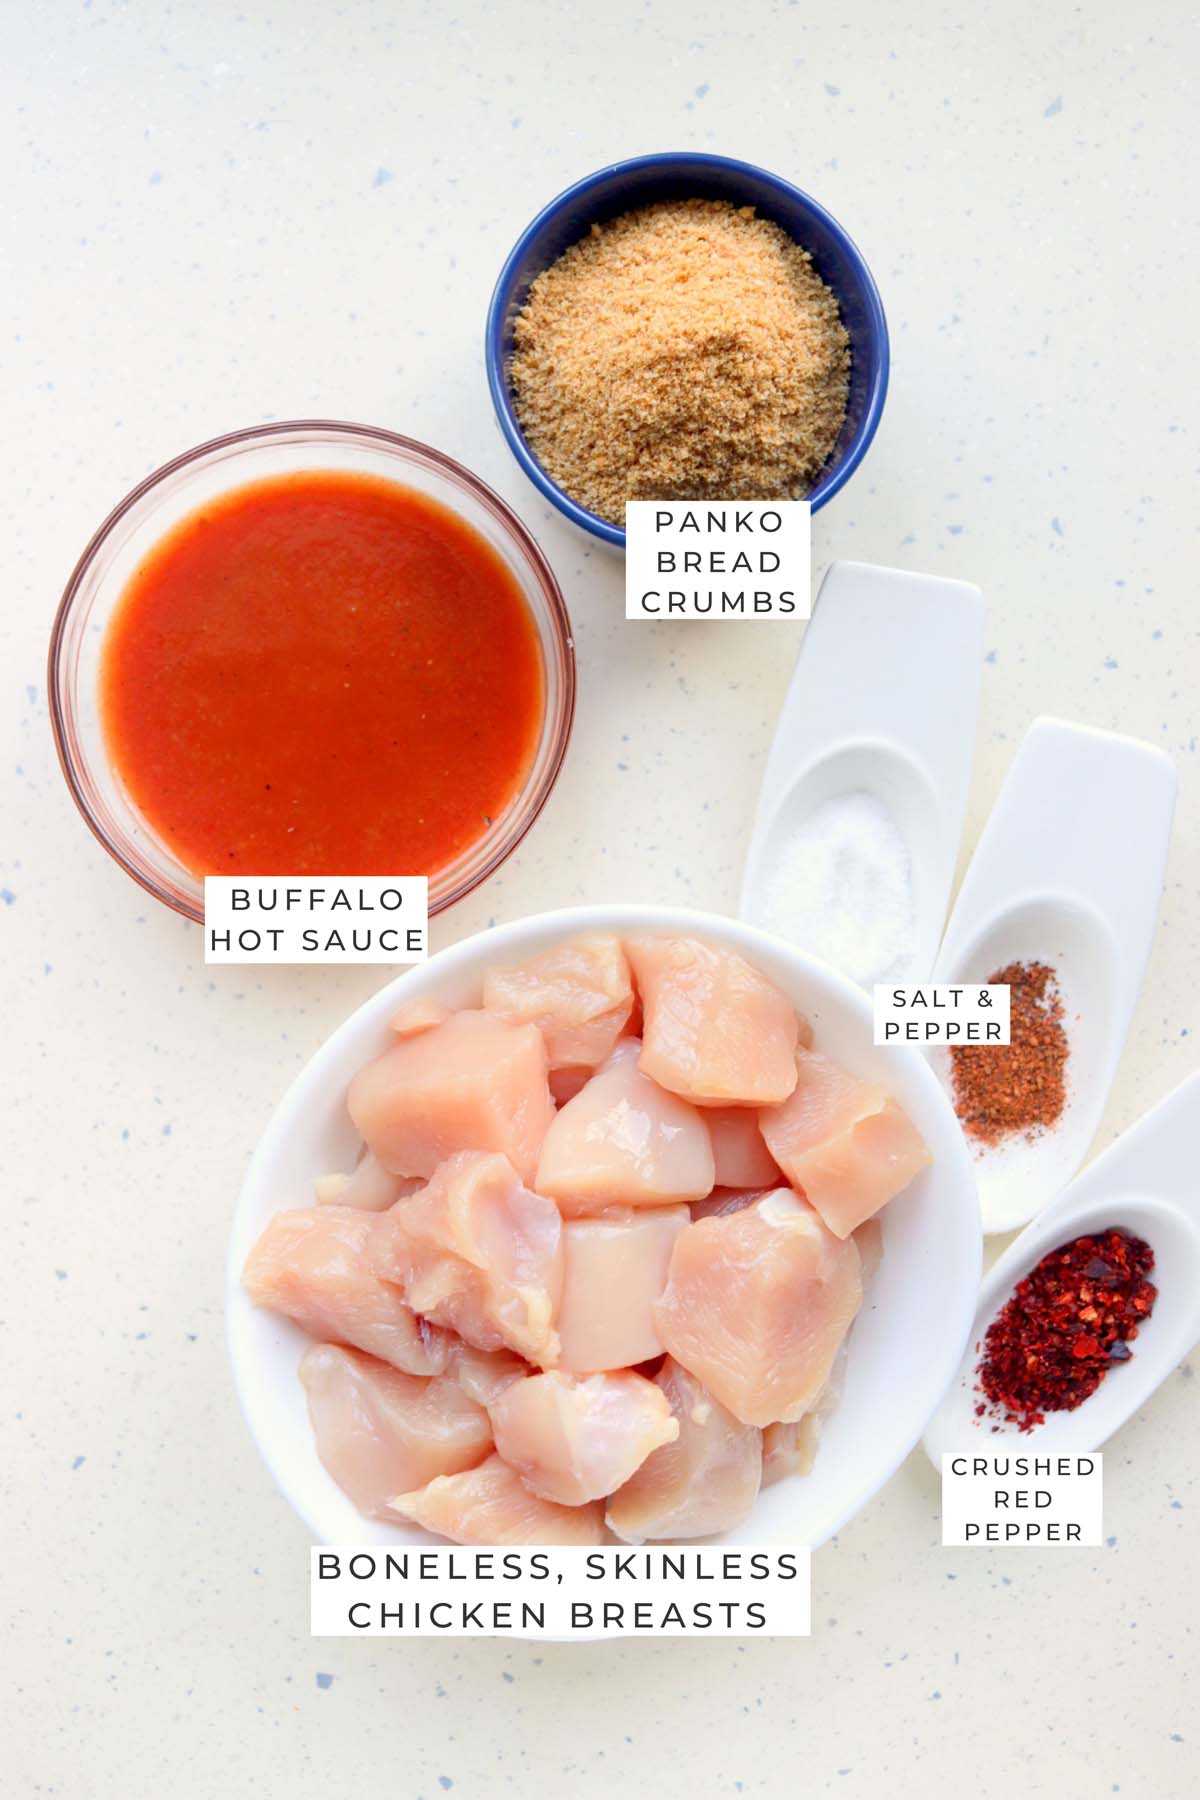 Labeled ingredients to make the chicken bites.